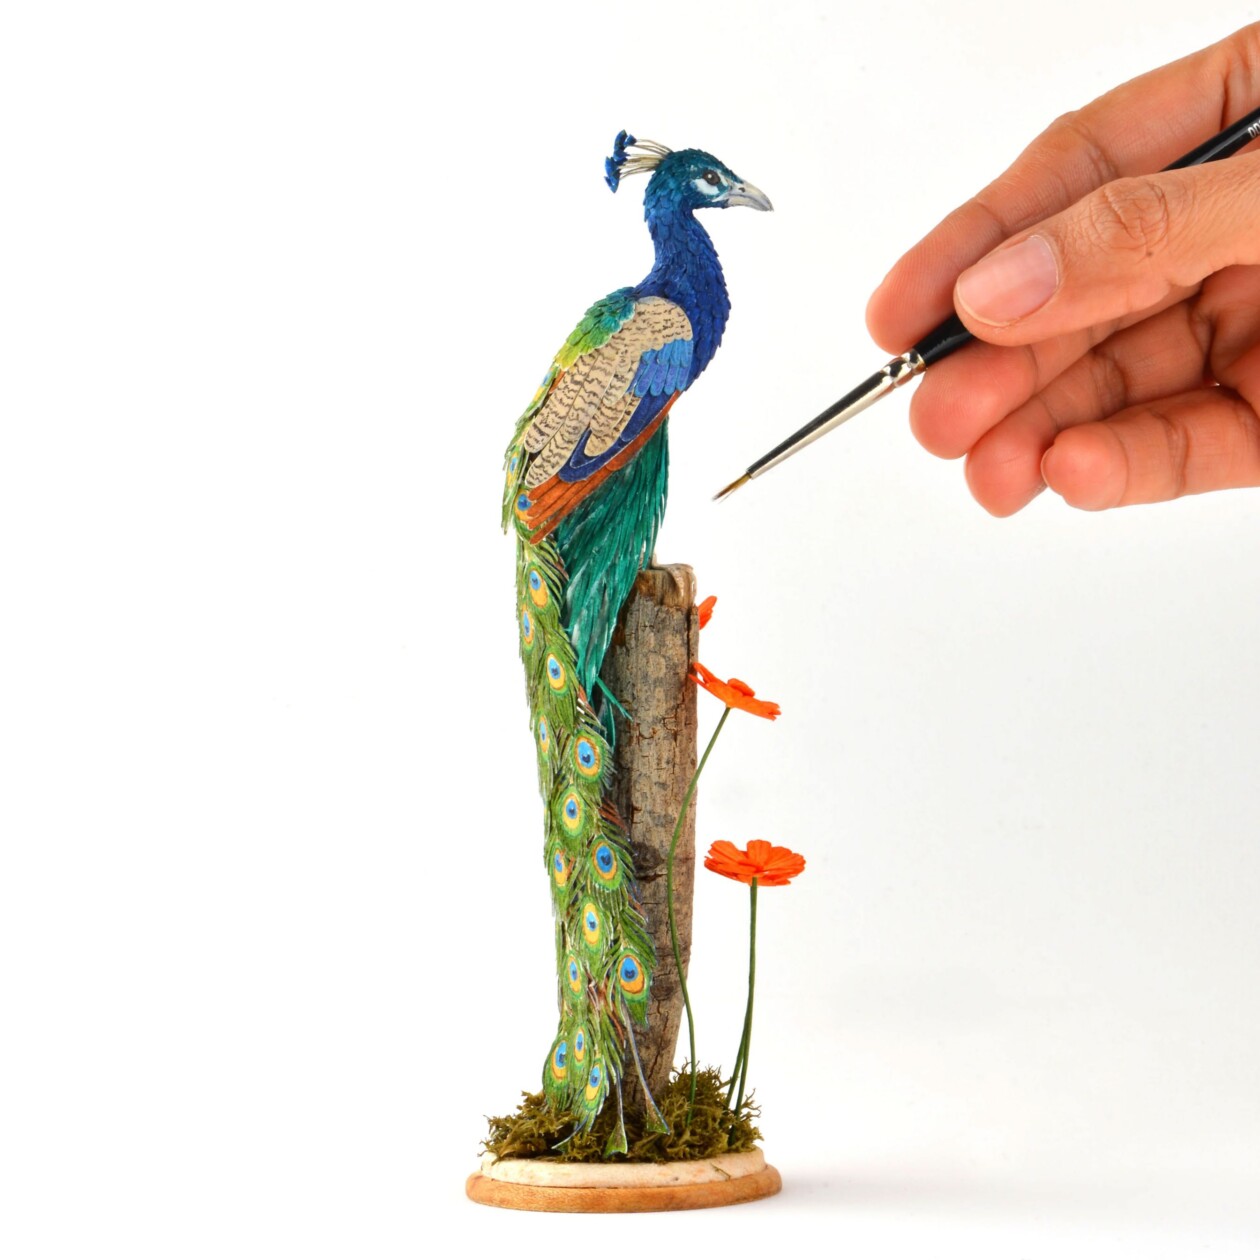 Miniature Bird Paper Sculptures With Whimsical Details By Nayan And Venus (3)